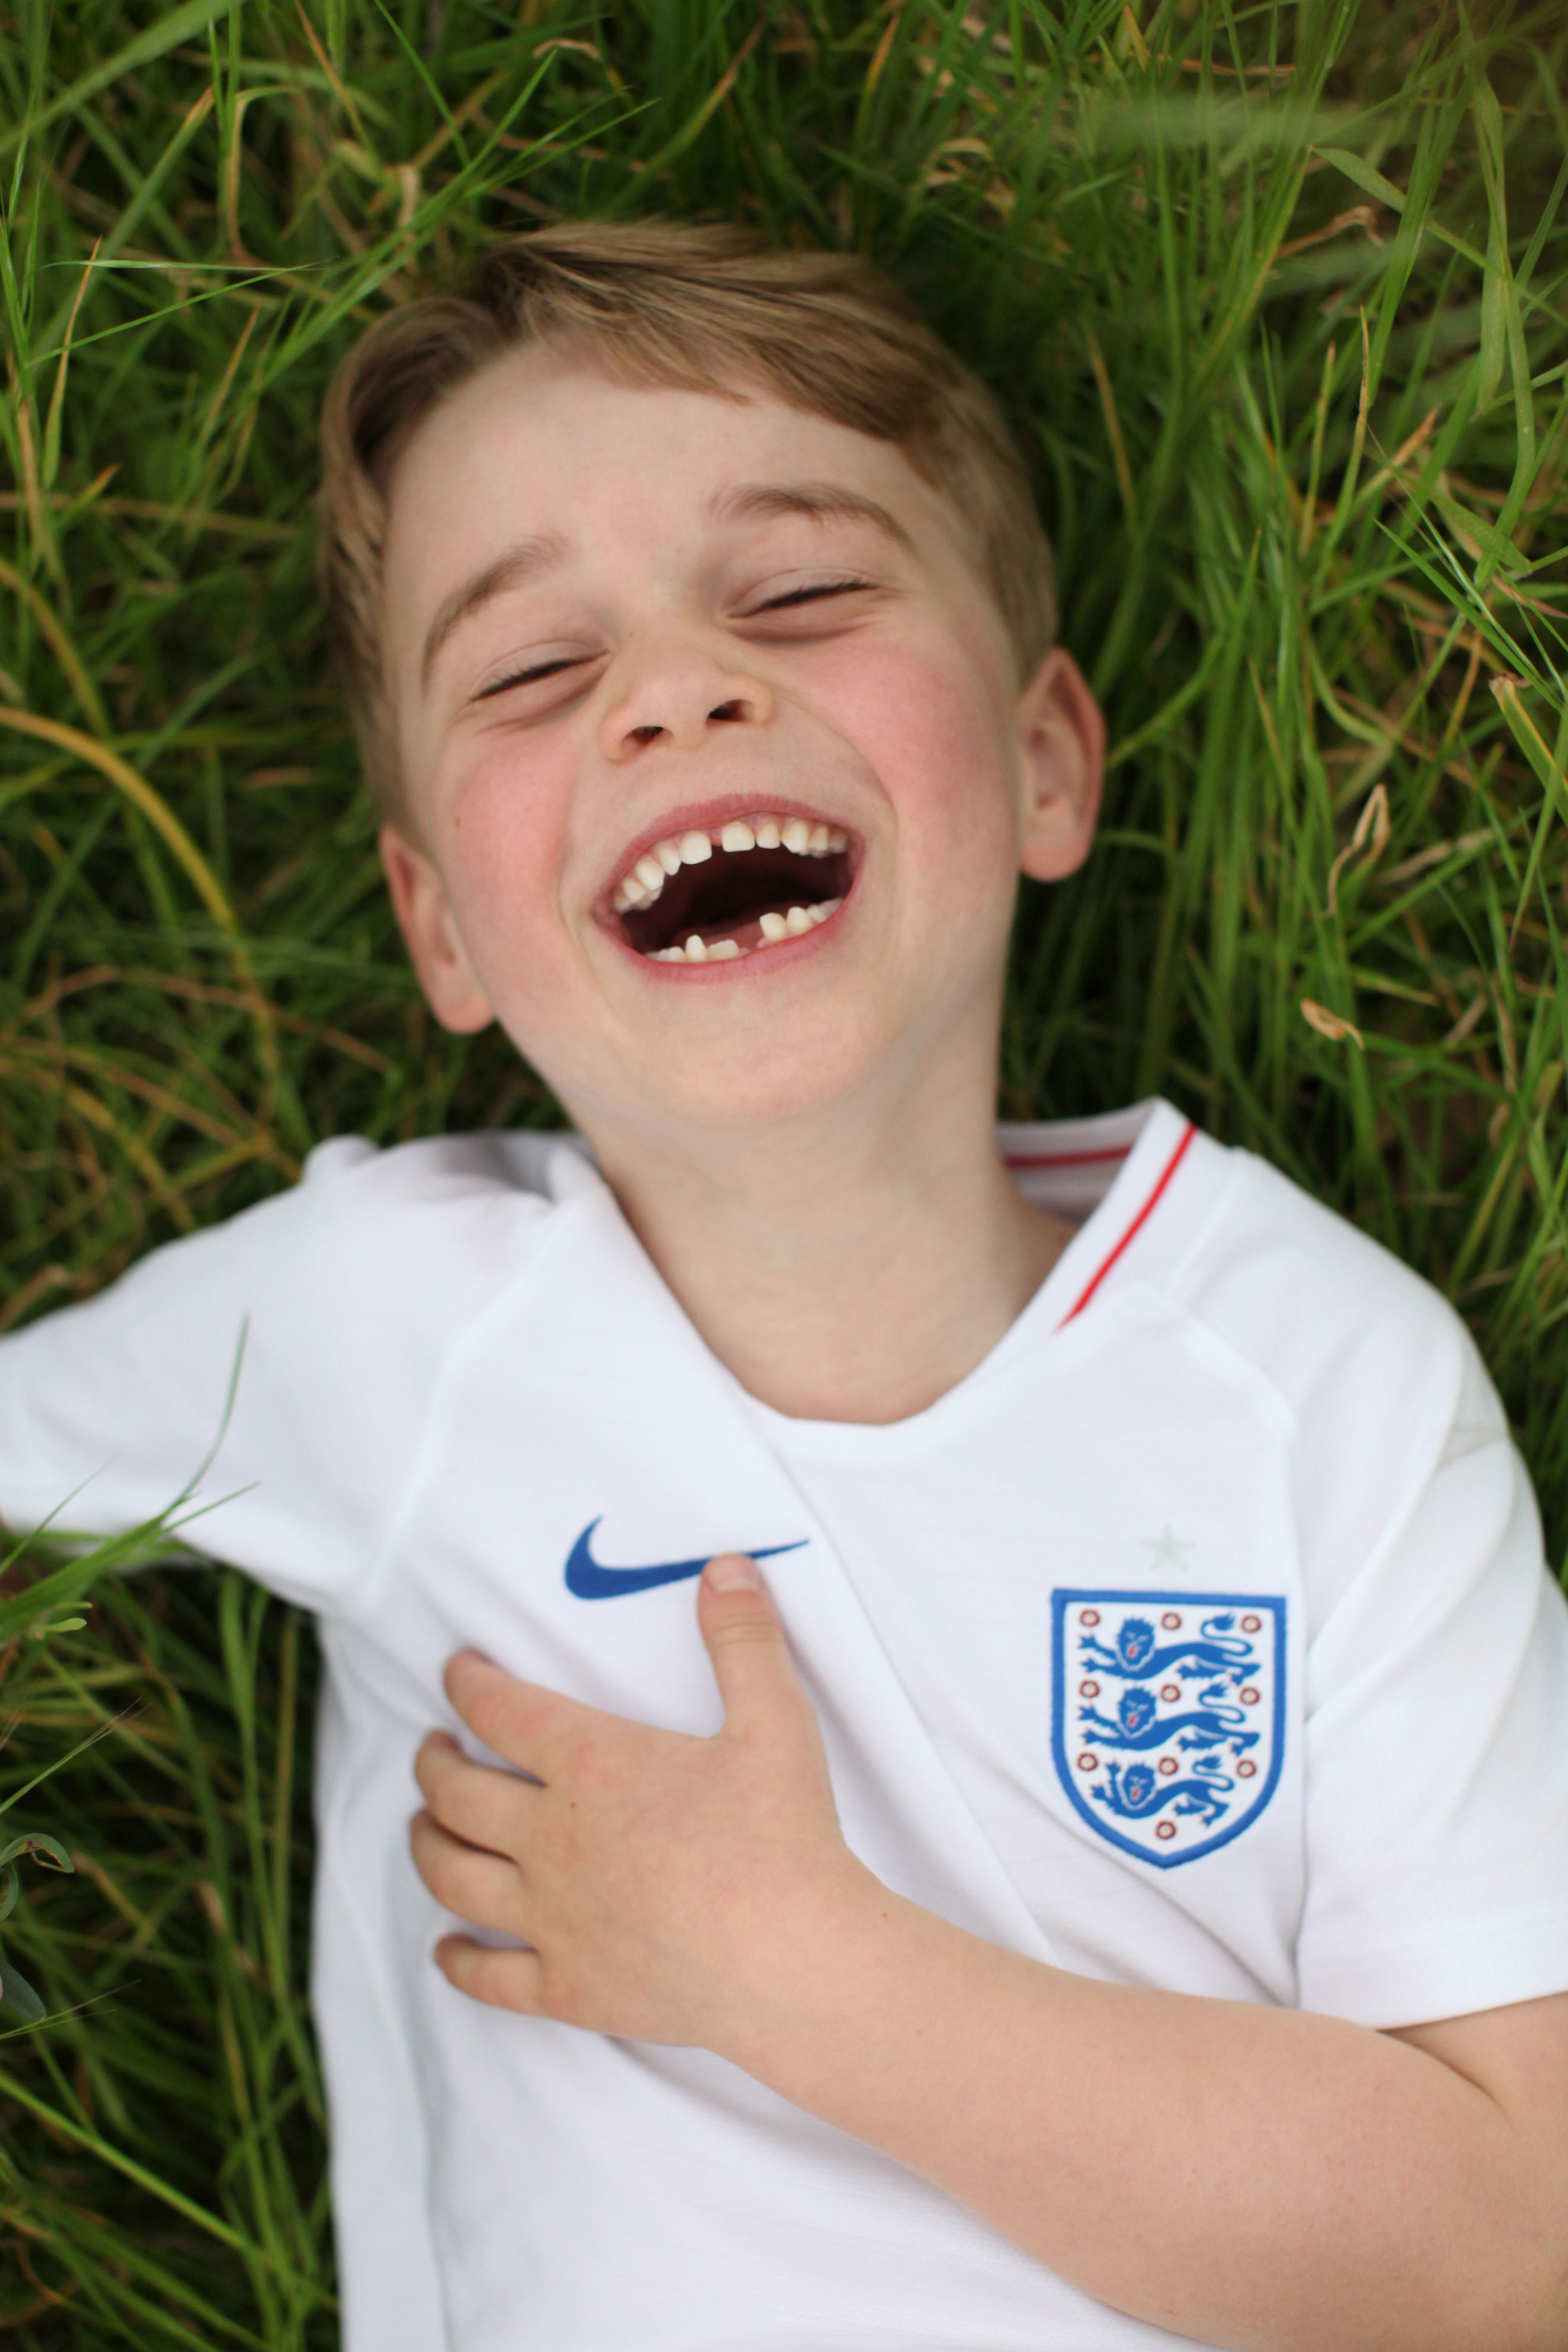 <p>Prince George is seen laughing in a photo taken by his mother in the garden at Kensington Palace to celebrate his 6th birthday on July 22, 2019.</p>